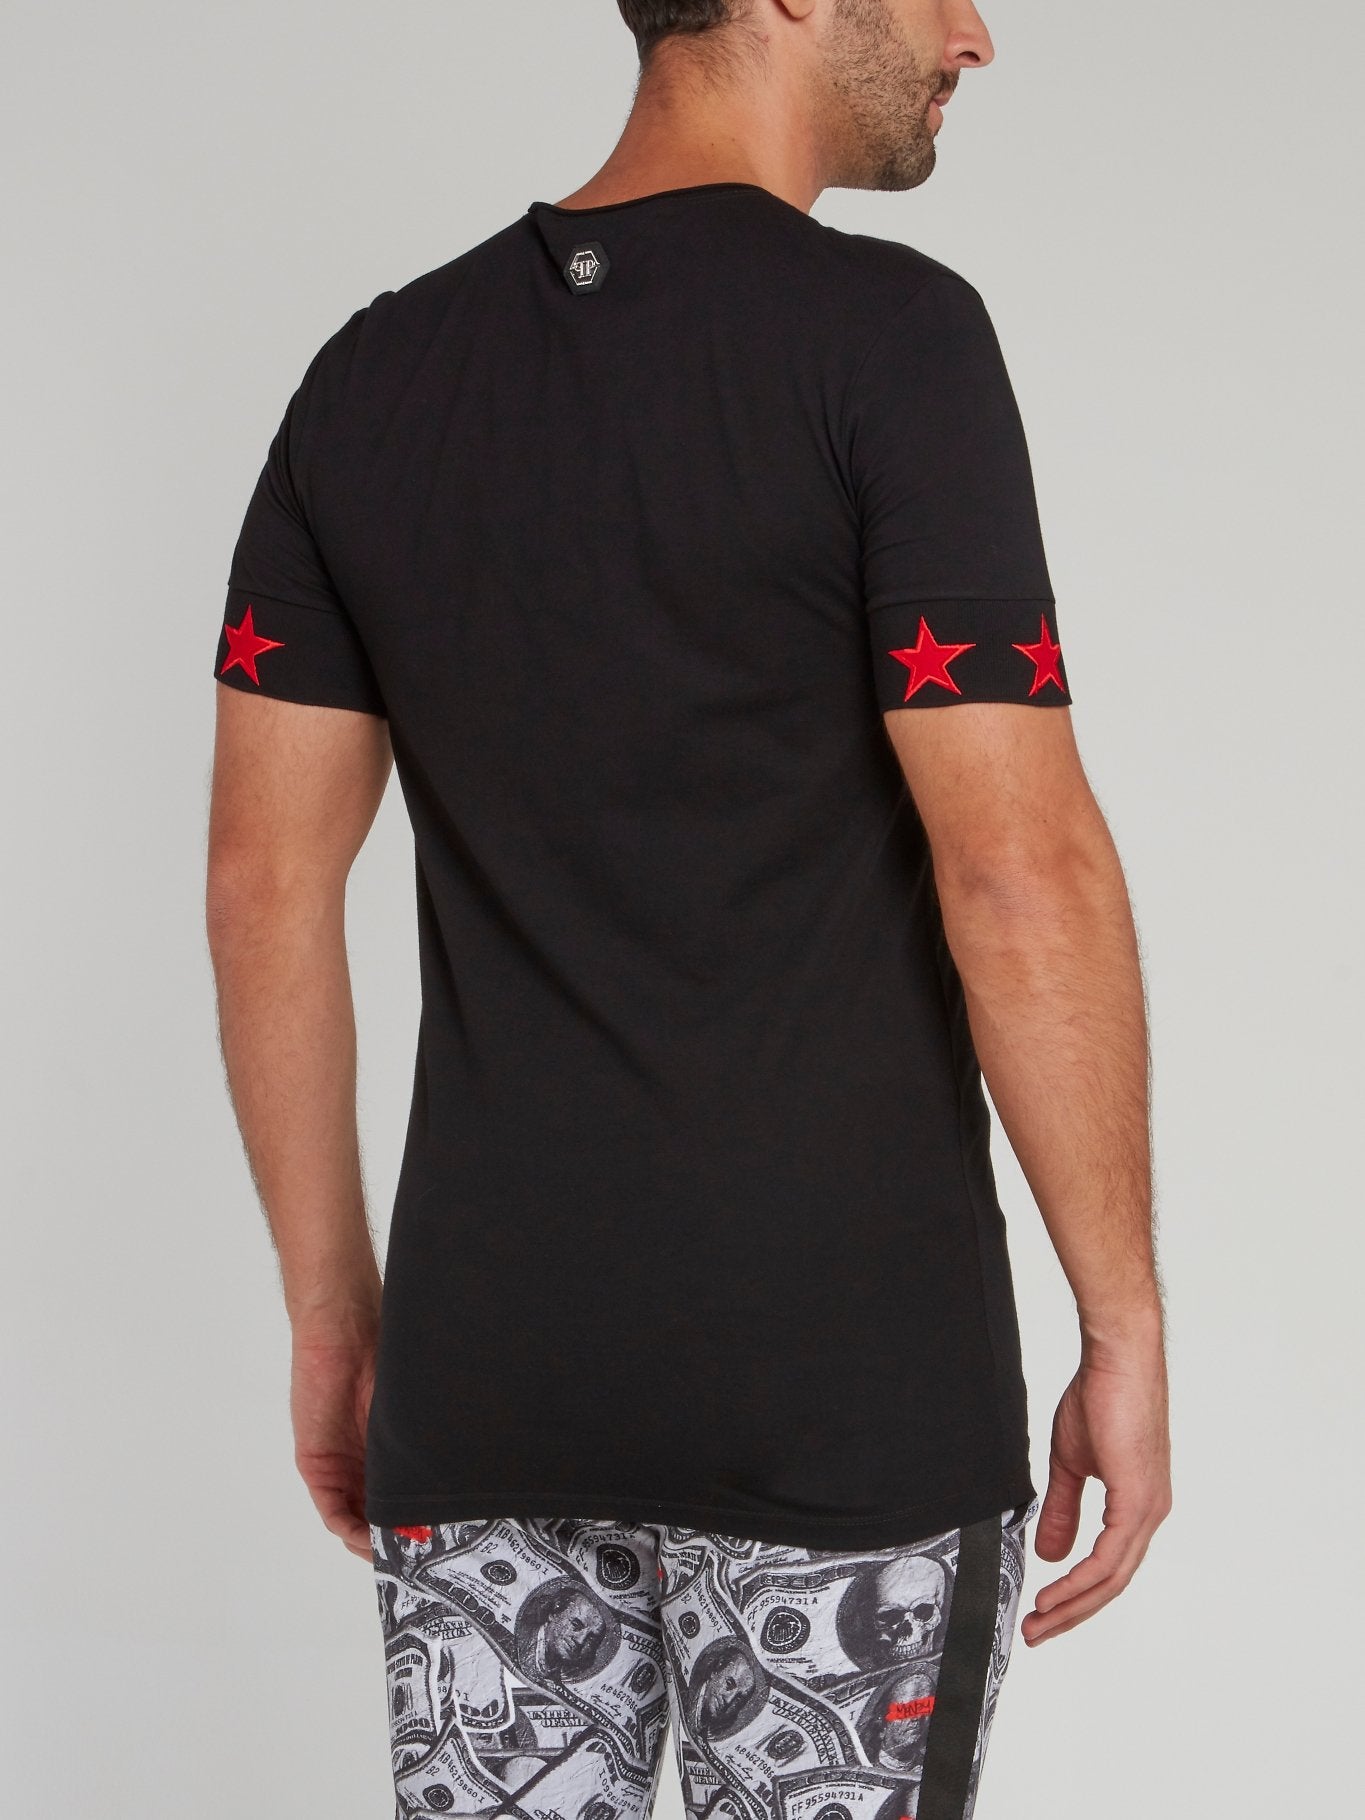 Black with Red Stars Skull T-Shirt